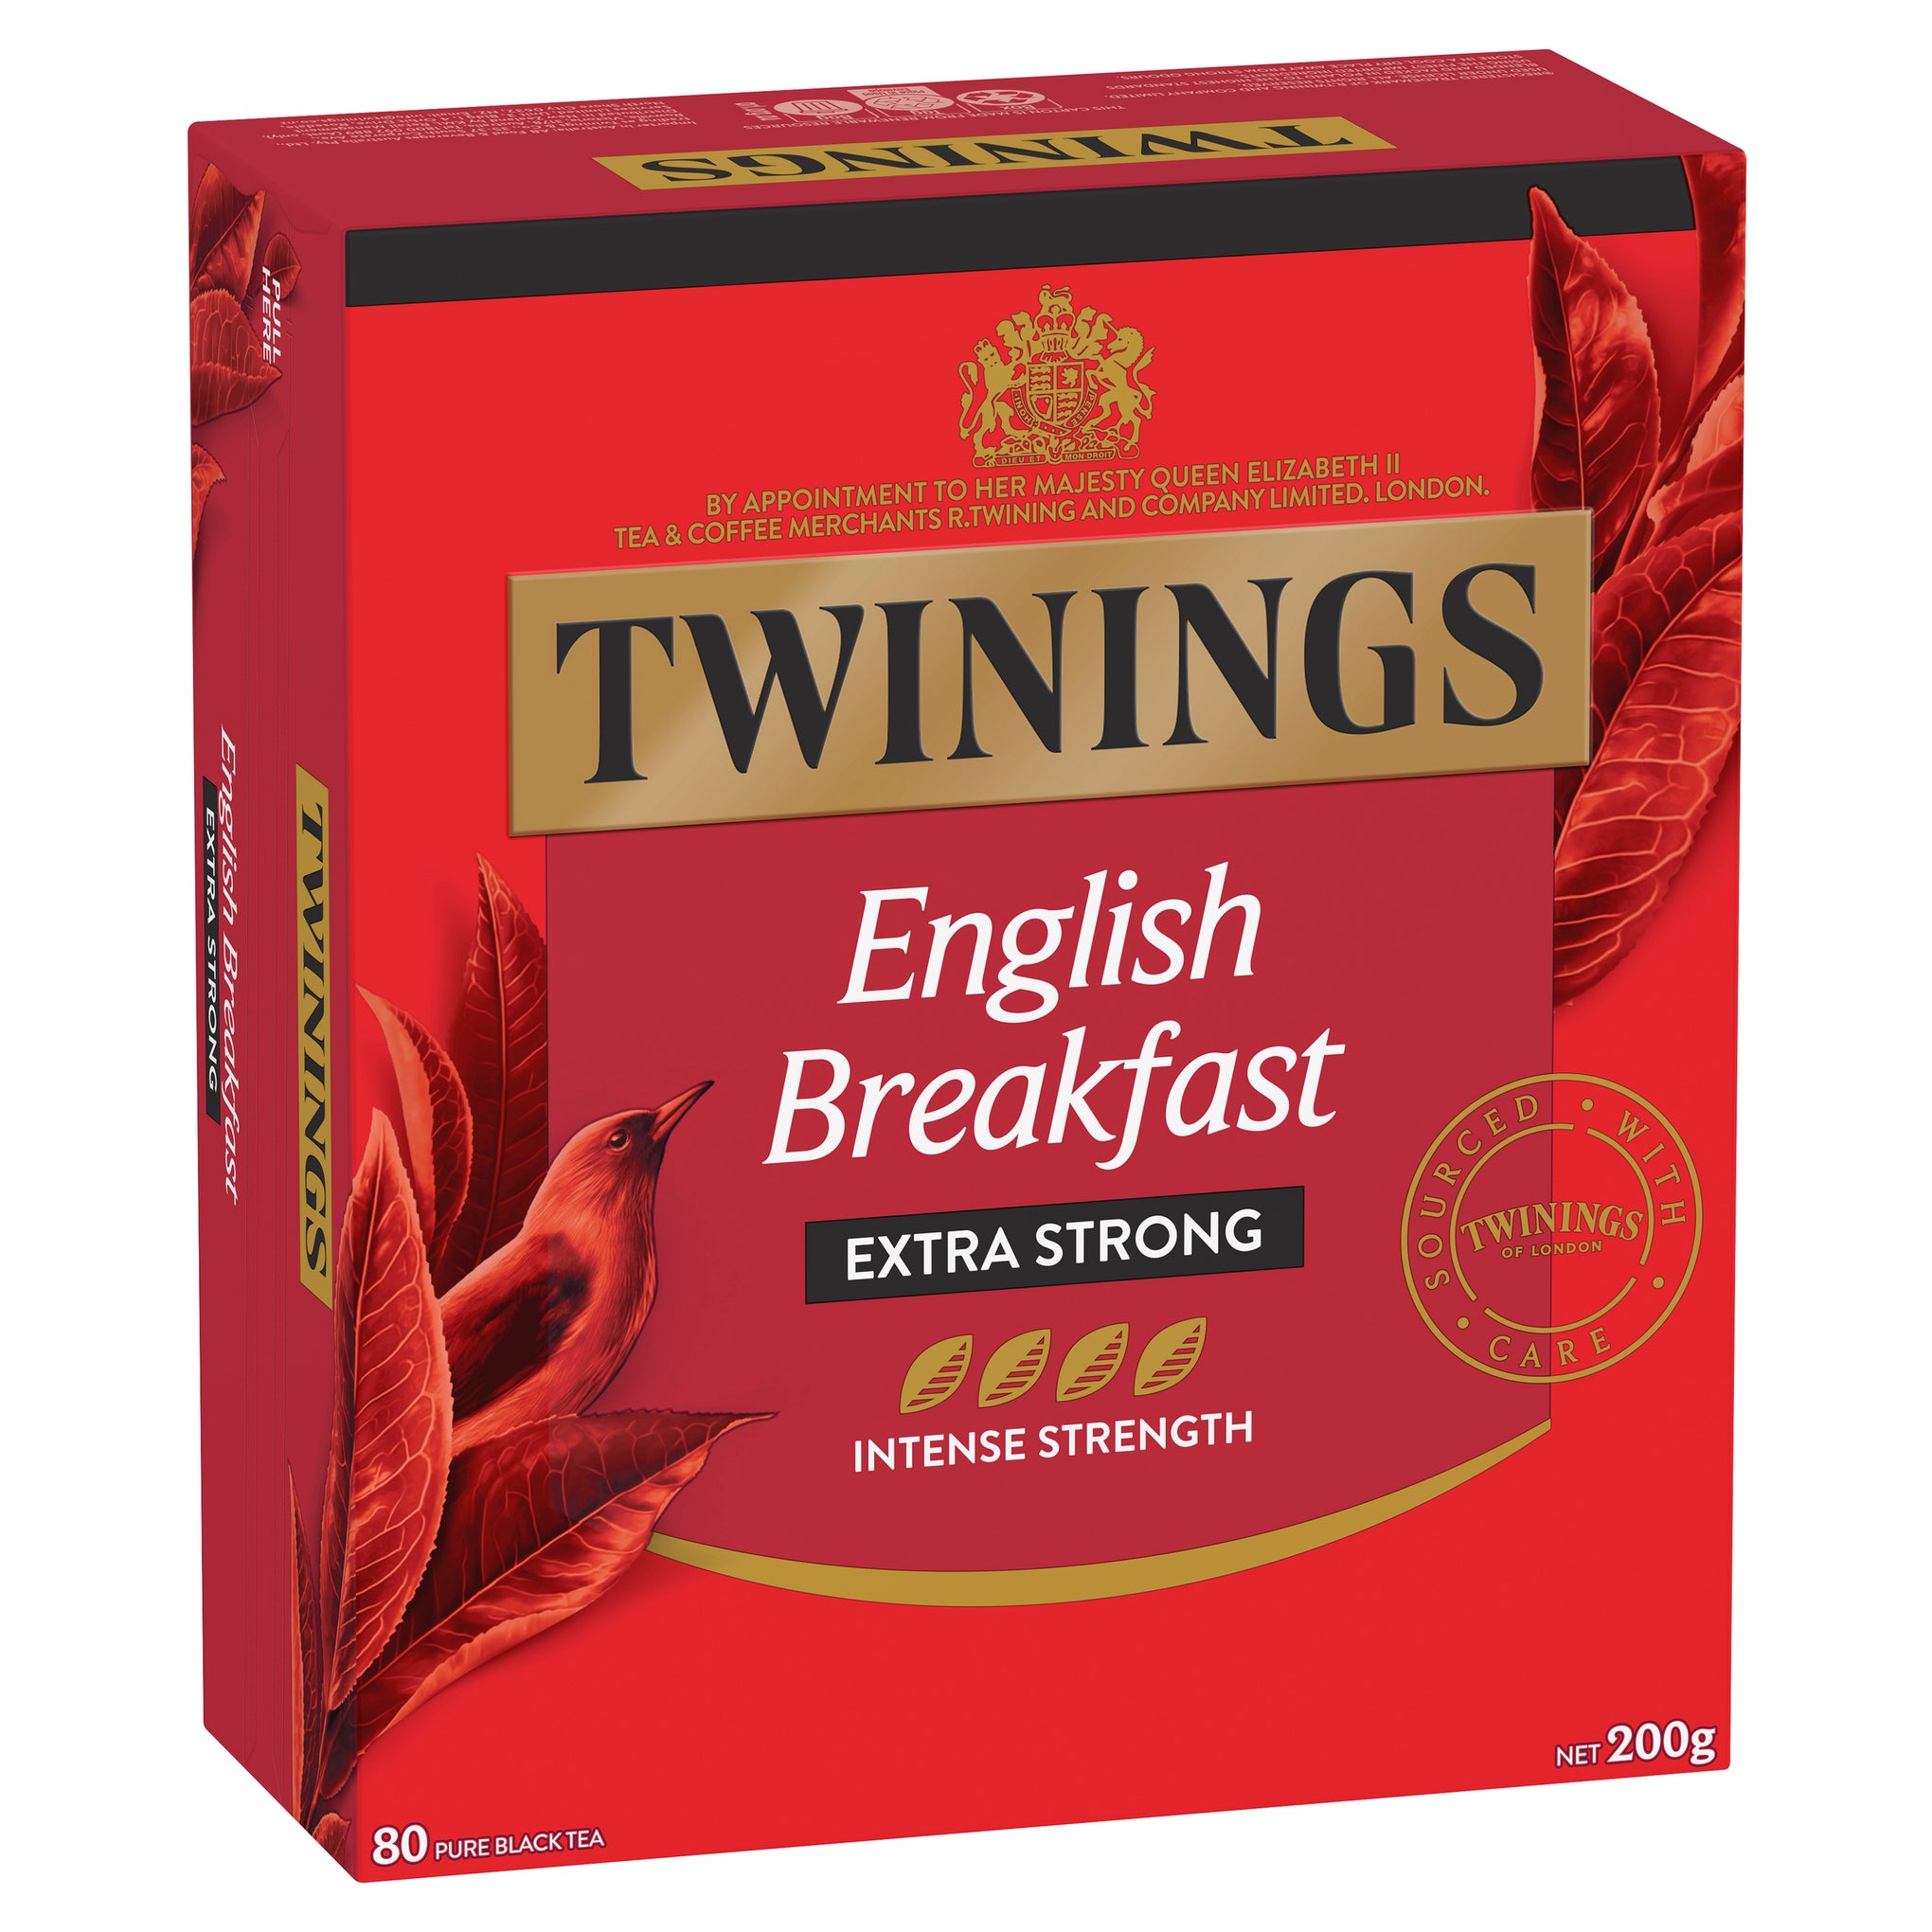 English Breakfast Extra Strong